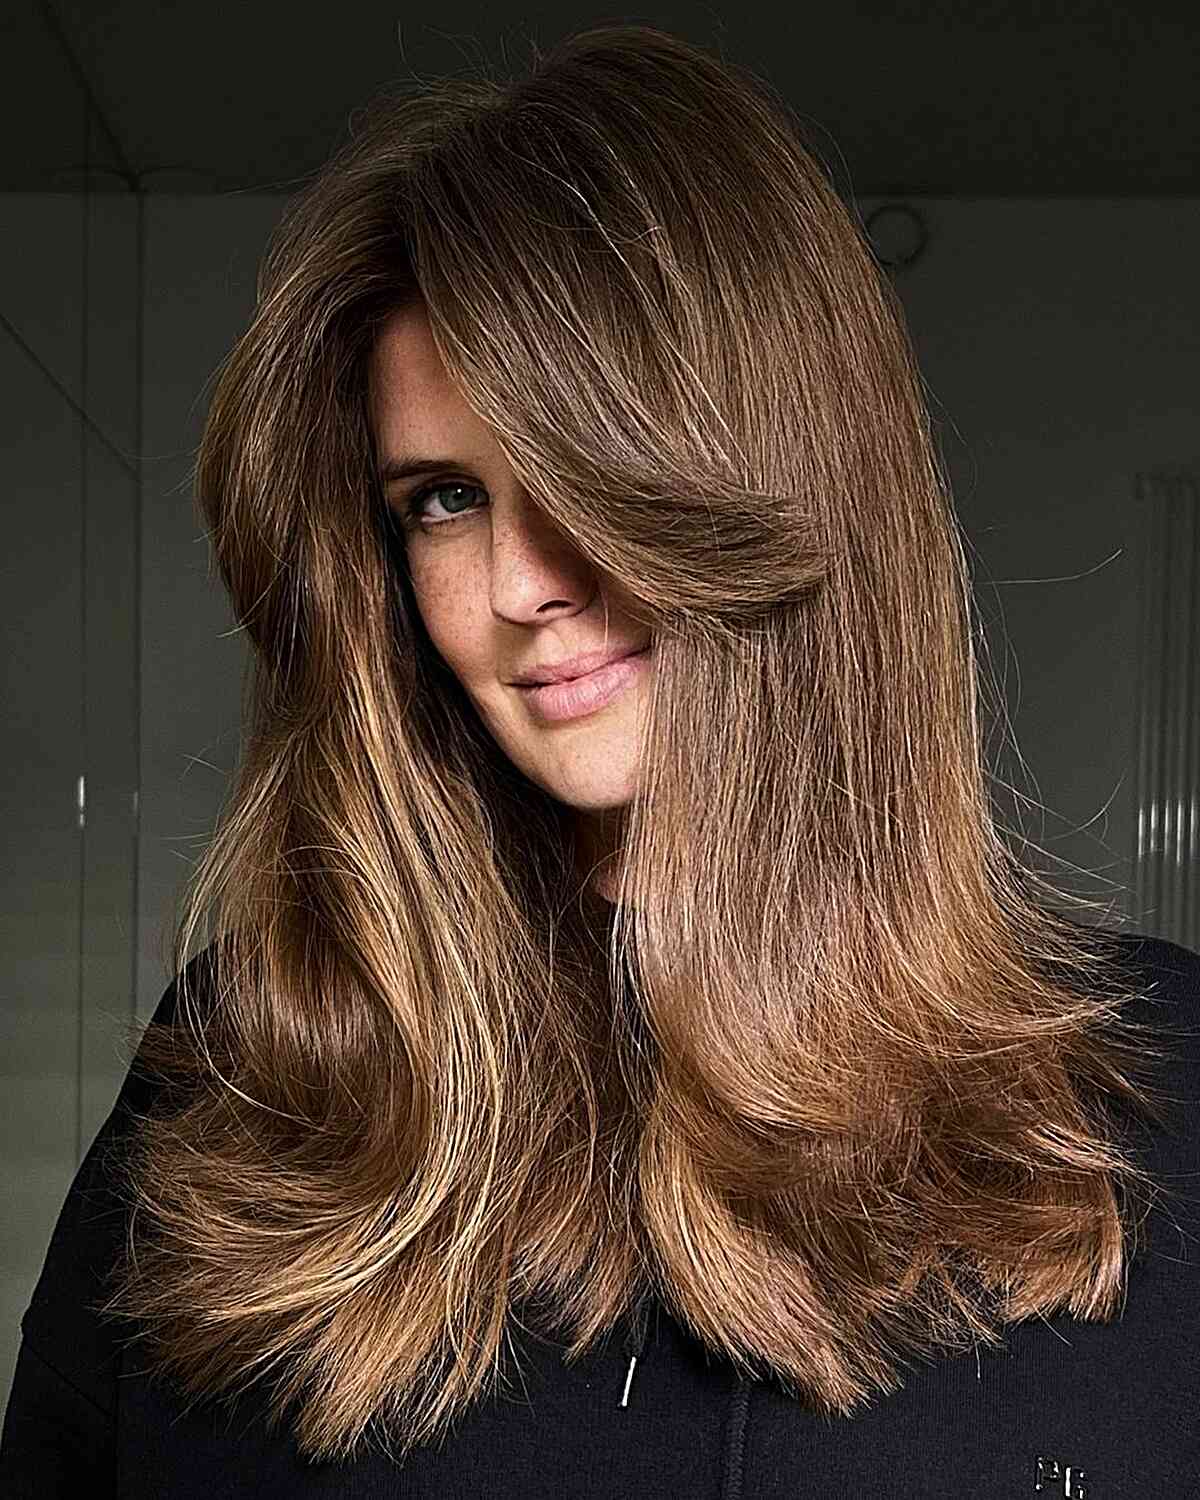 Mid-Long Feathery Layered Hair with Long Curtain Bangs for Thicker Locks